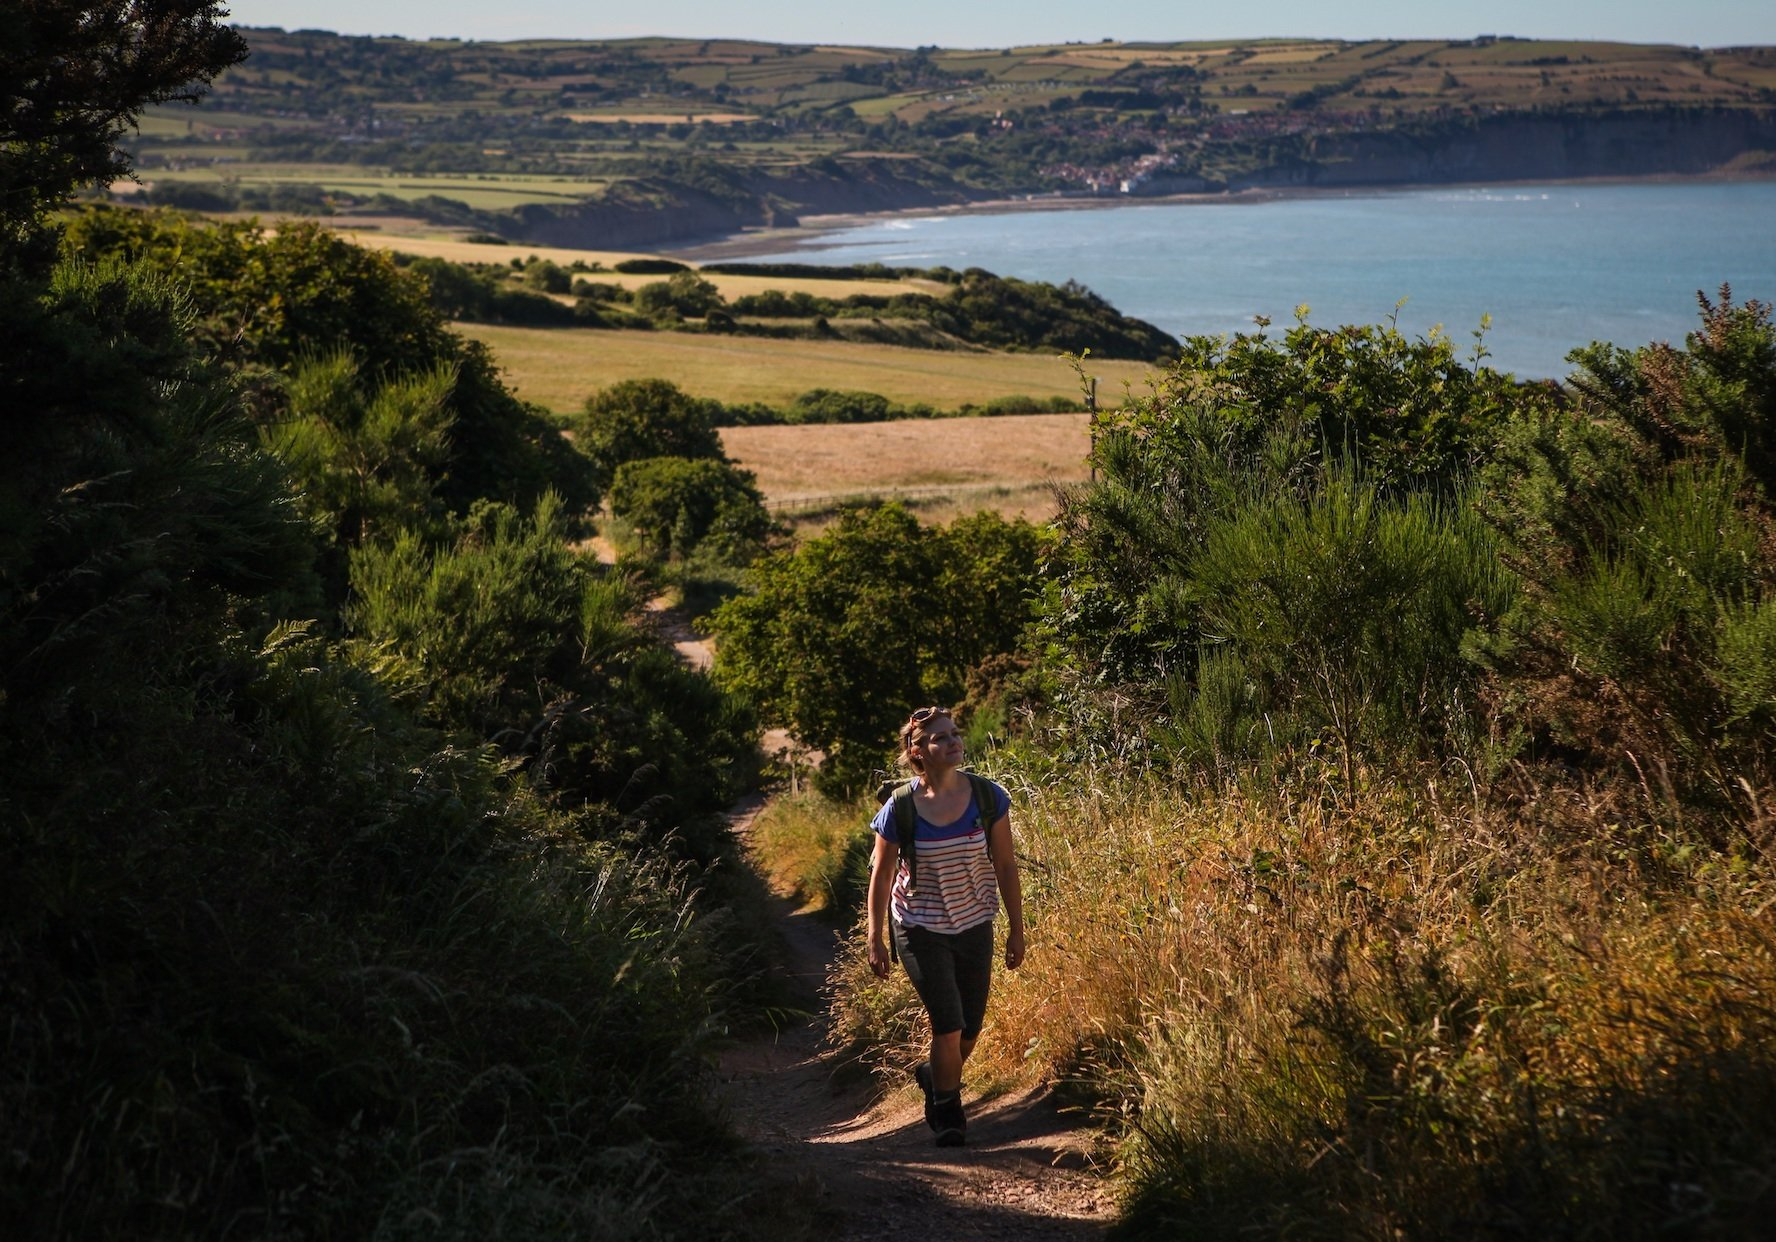 Image taken at Ravenscar - a place where Adventures for the Soul runs its  mindful meander on the coast experience. (c) Ceri Oakes